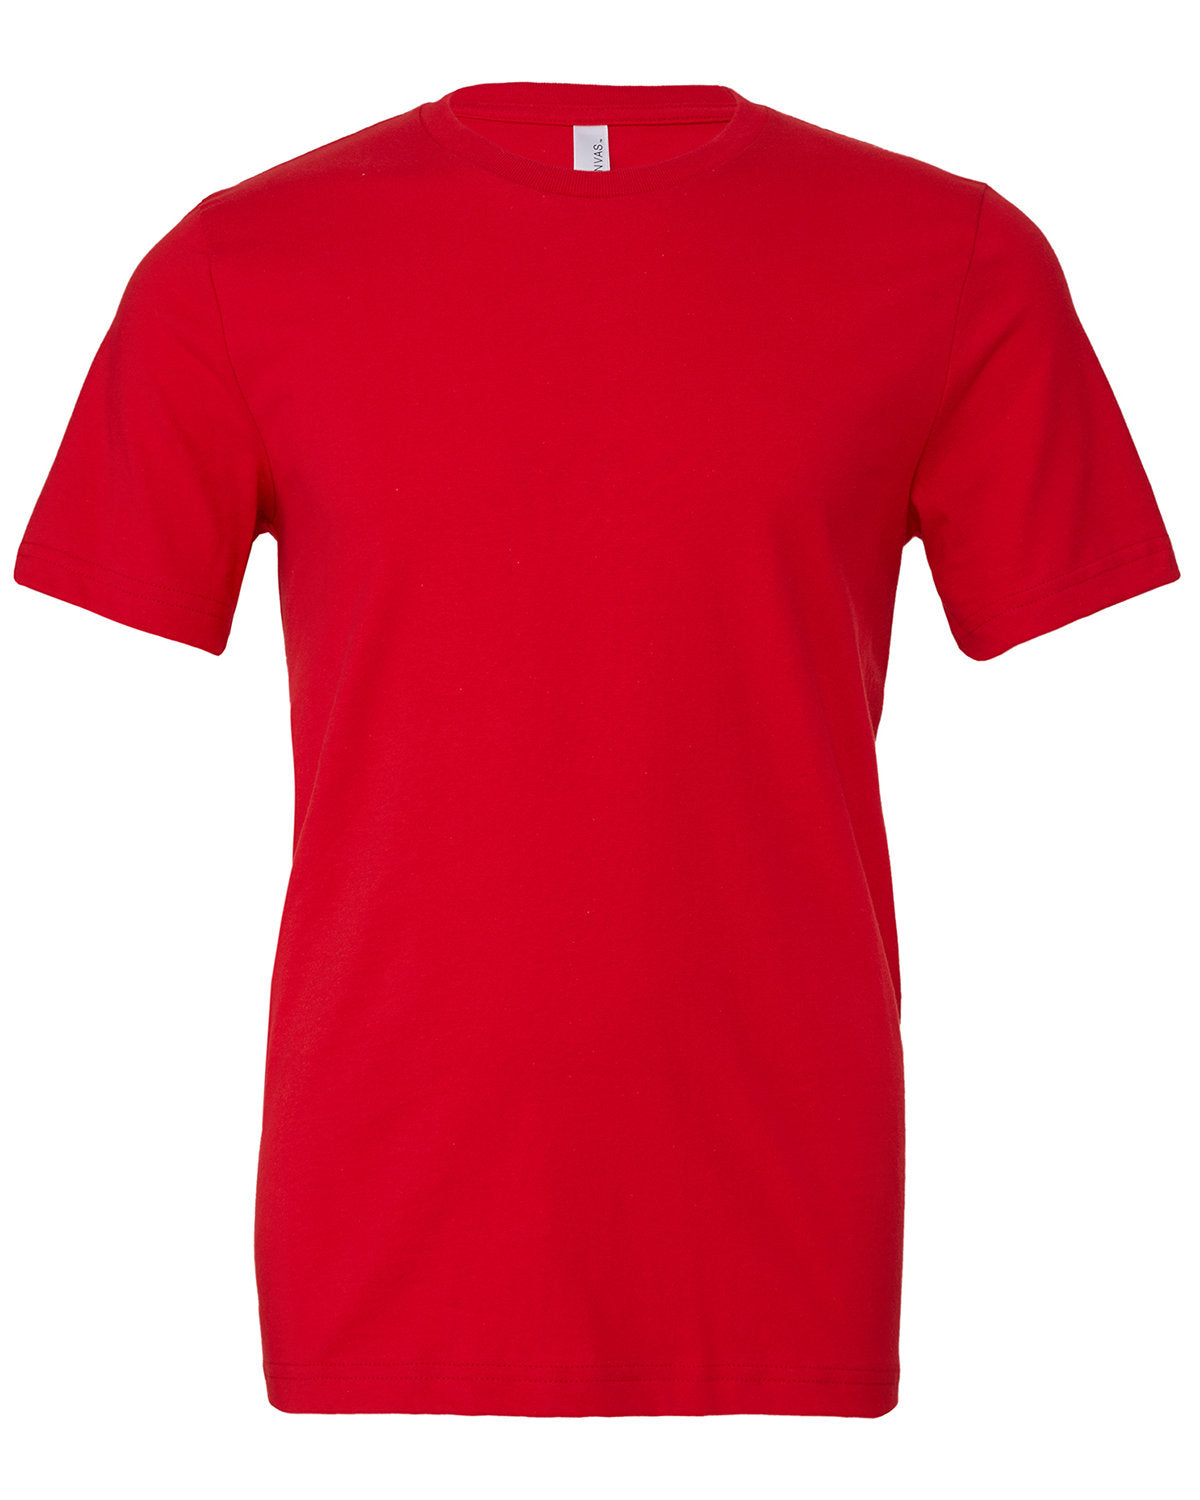 A Bella Canvas red t-shirt from Show Off Your Threads featuring custom embroidery, displayed against a white background, showcasing a simple crew neck and short sleeves.